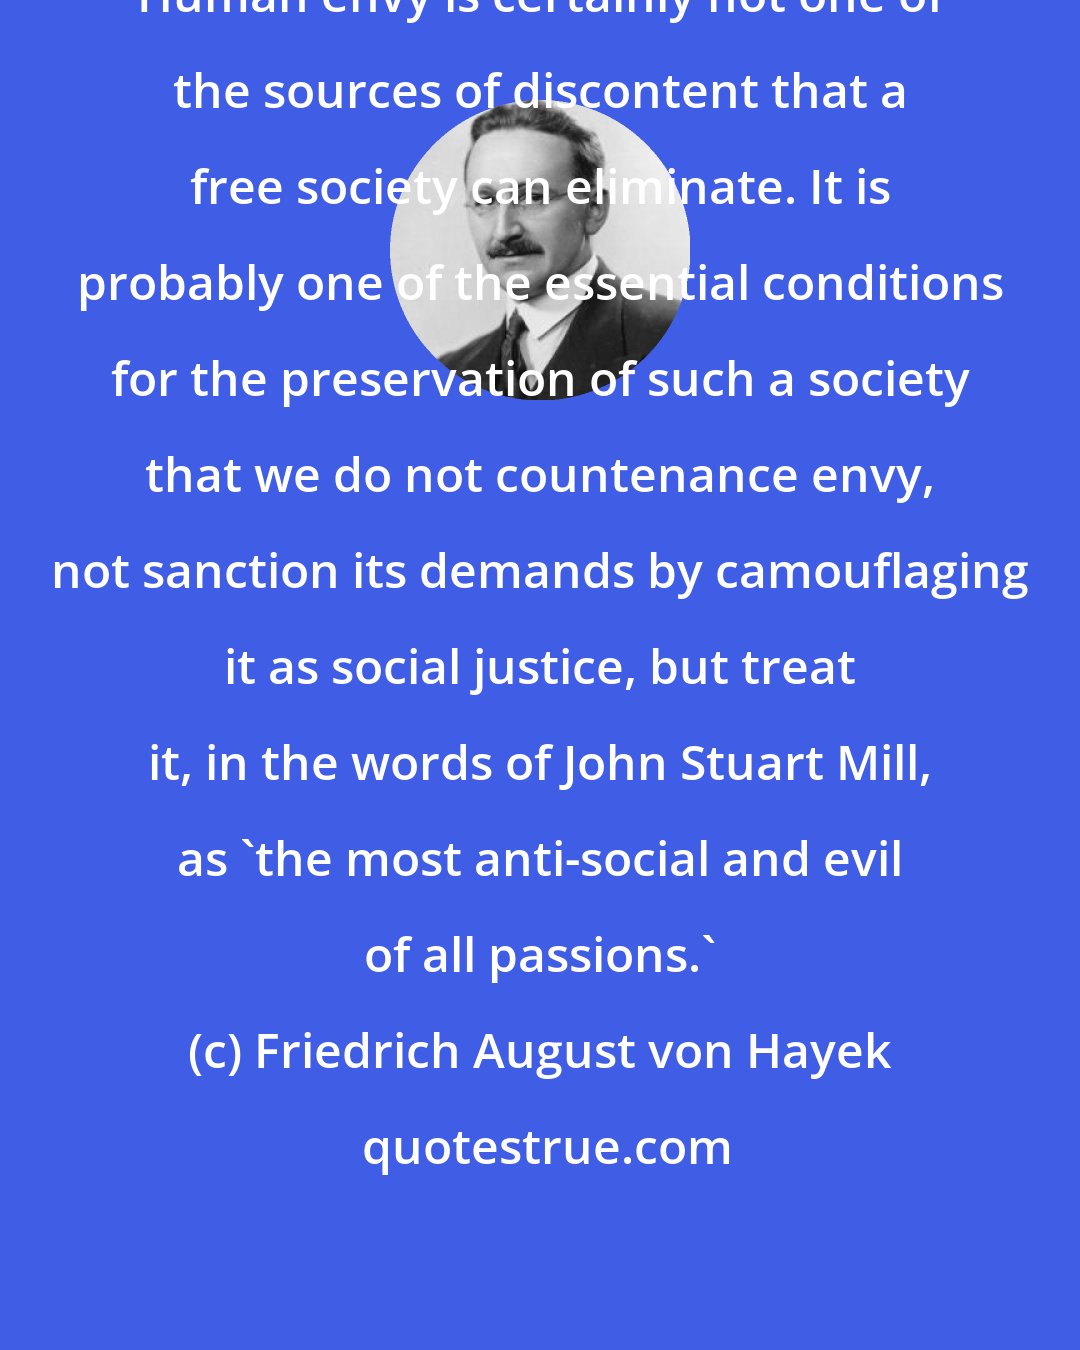 Friedrich August von Hayek: Human envy is certainly not one of the sources of discontent that a free society can eliminate. It is probably one of the essential conditions for the preservation of such a society that we do not countenance envy, not sanction its demands by camouflaging it as social justice, but treat it, in the words of John Stuart Mill, as 'the most anti-social and evil of all passions.'